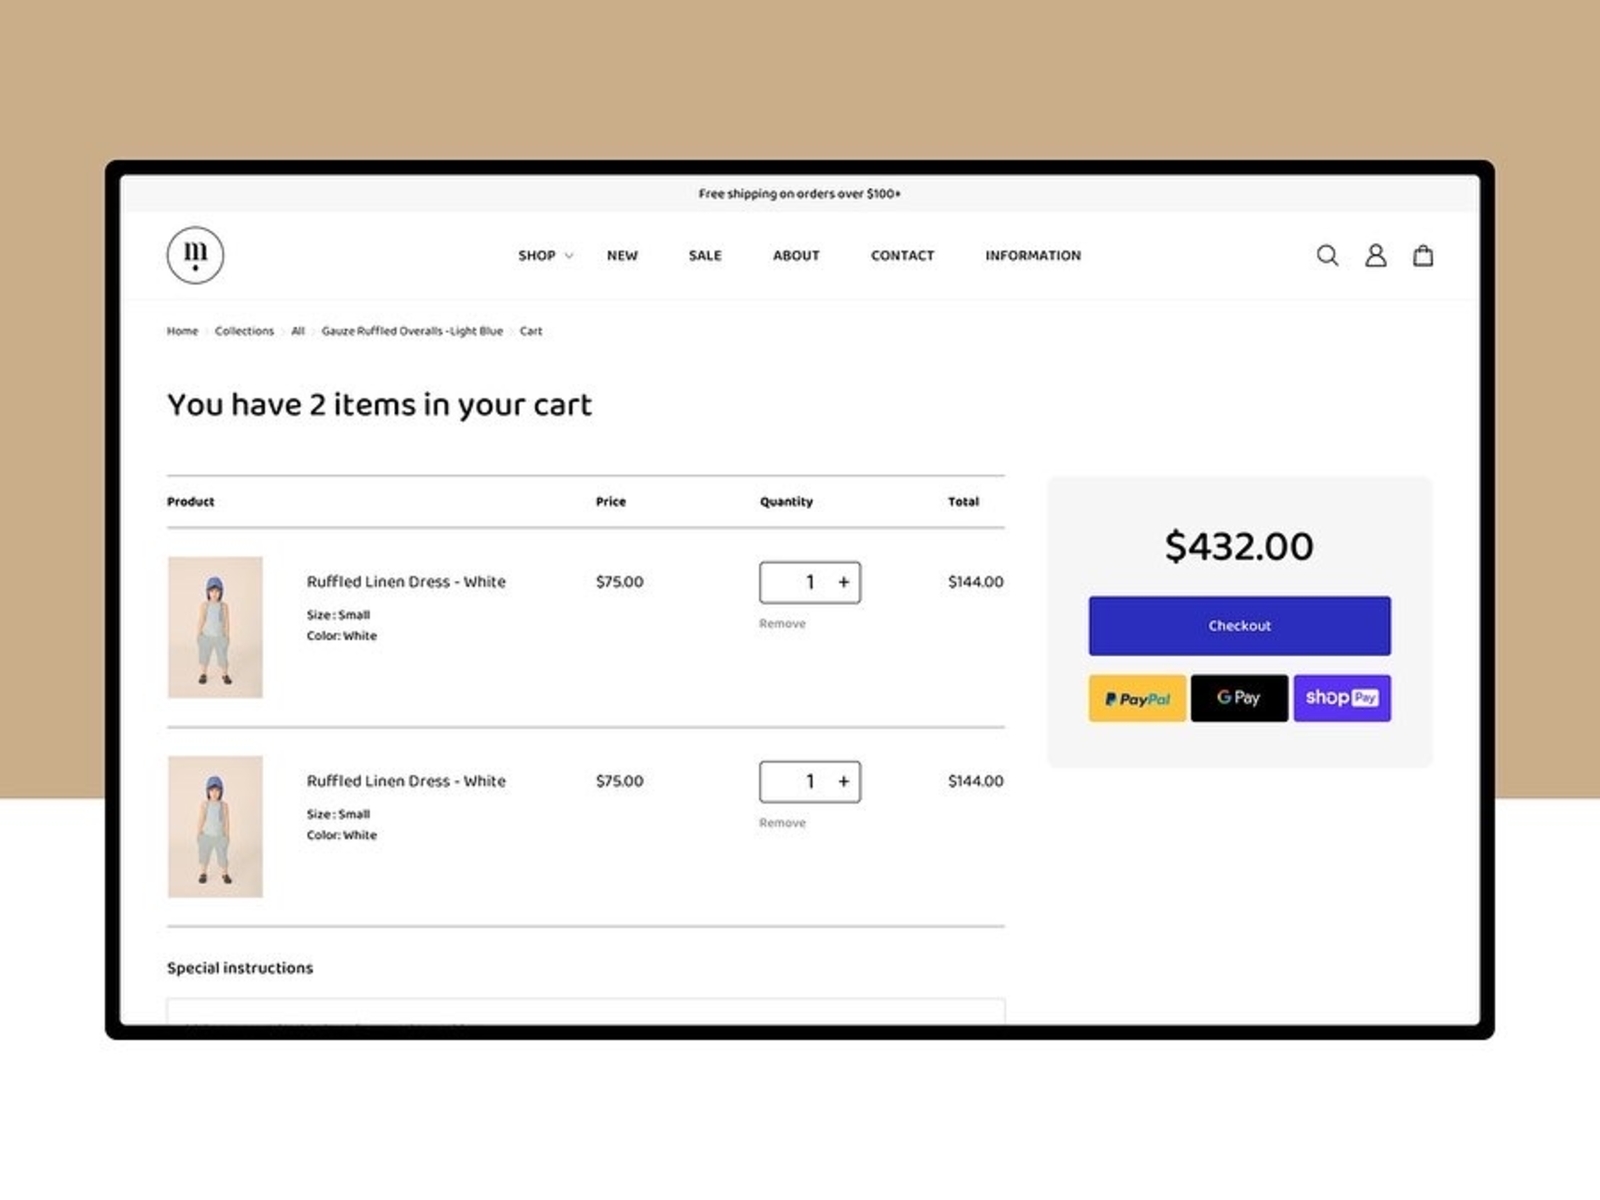 Secondary shopping cart to make it easier to checkout